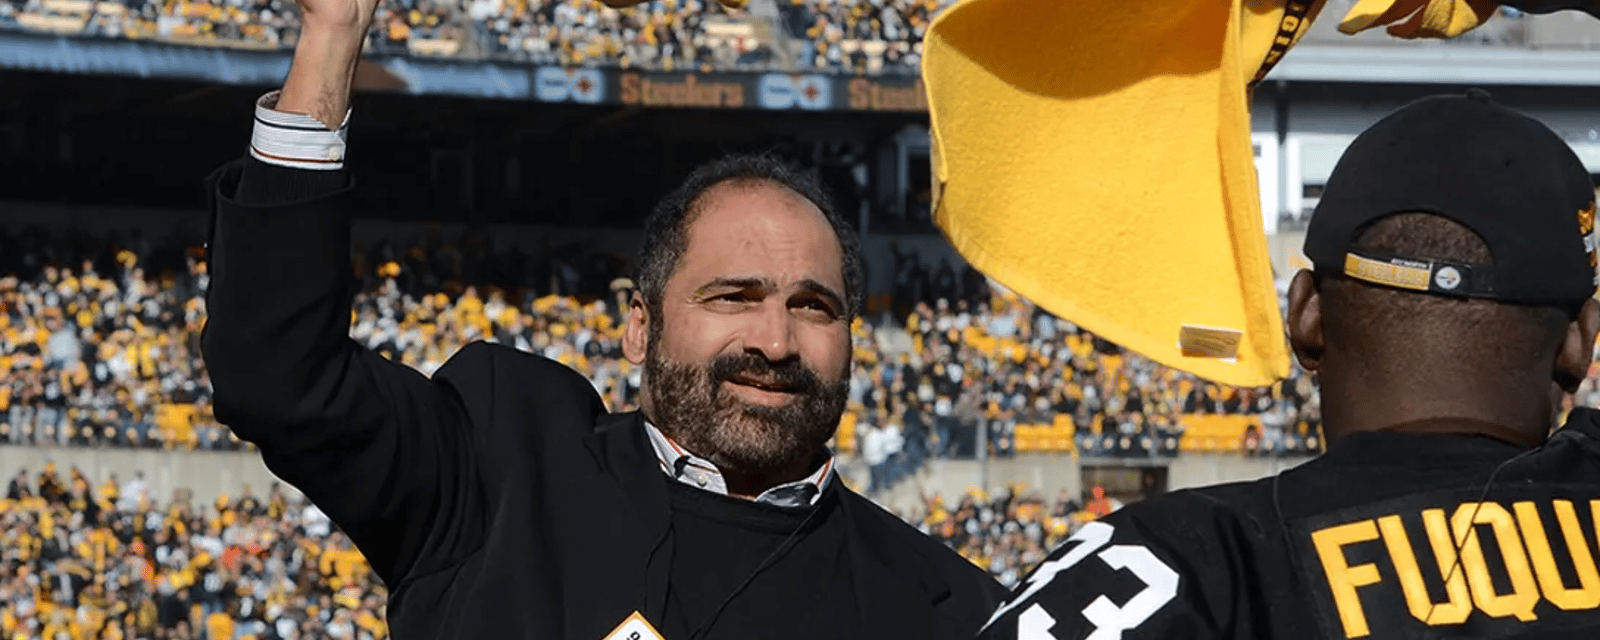 Fans FURIOUS after NFL Network cuts from Franco Harris tribute 